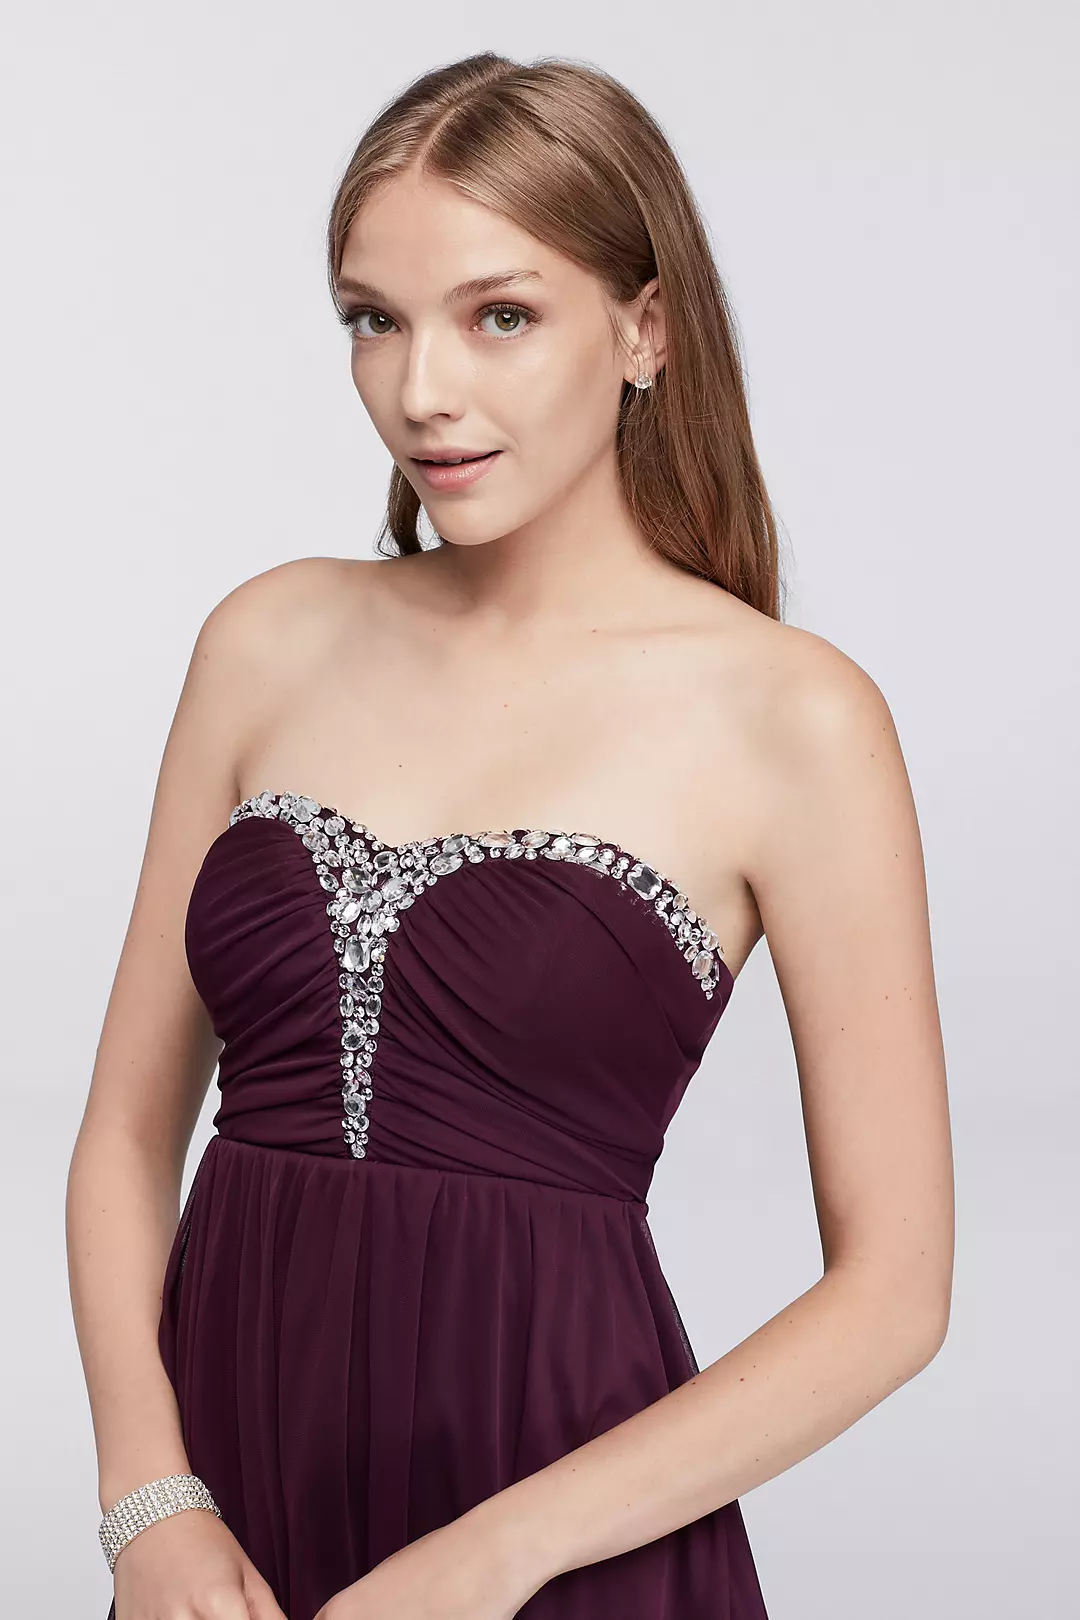 Strapless Dress with Sweetheart Crystal Bodice Image 3